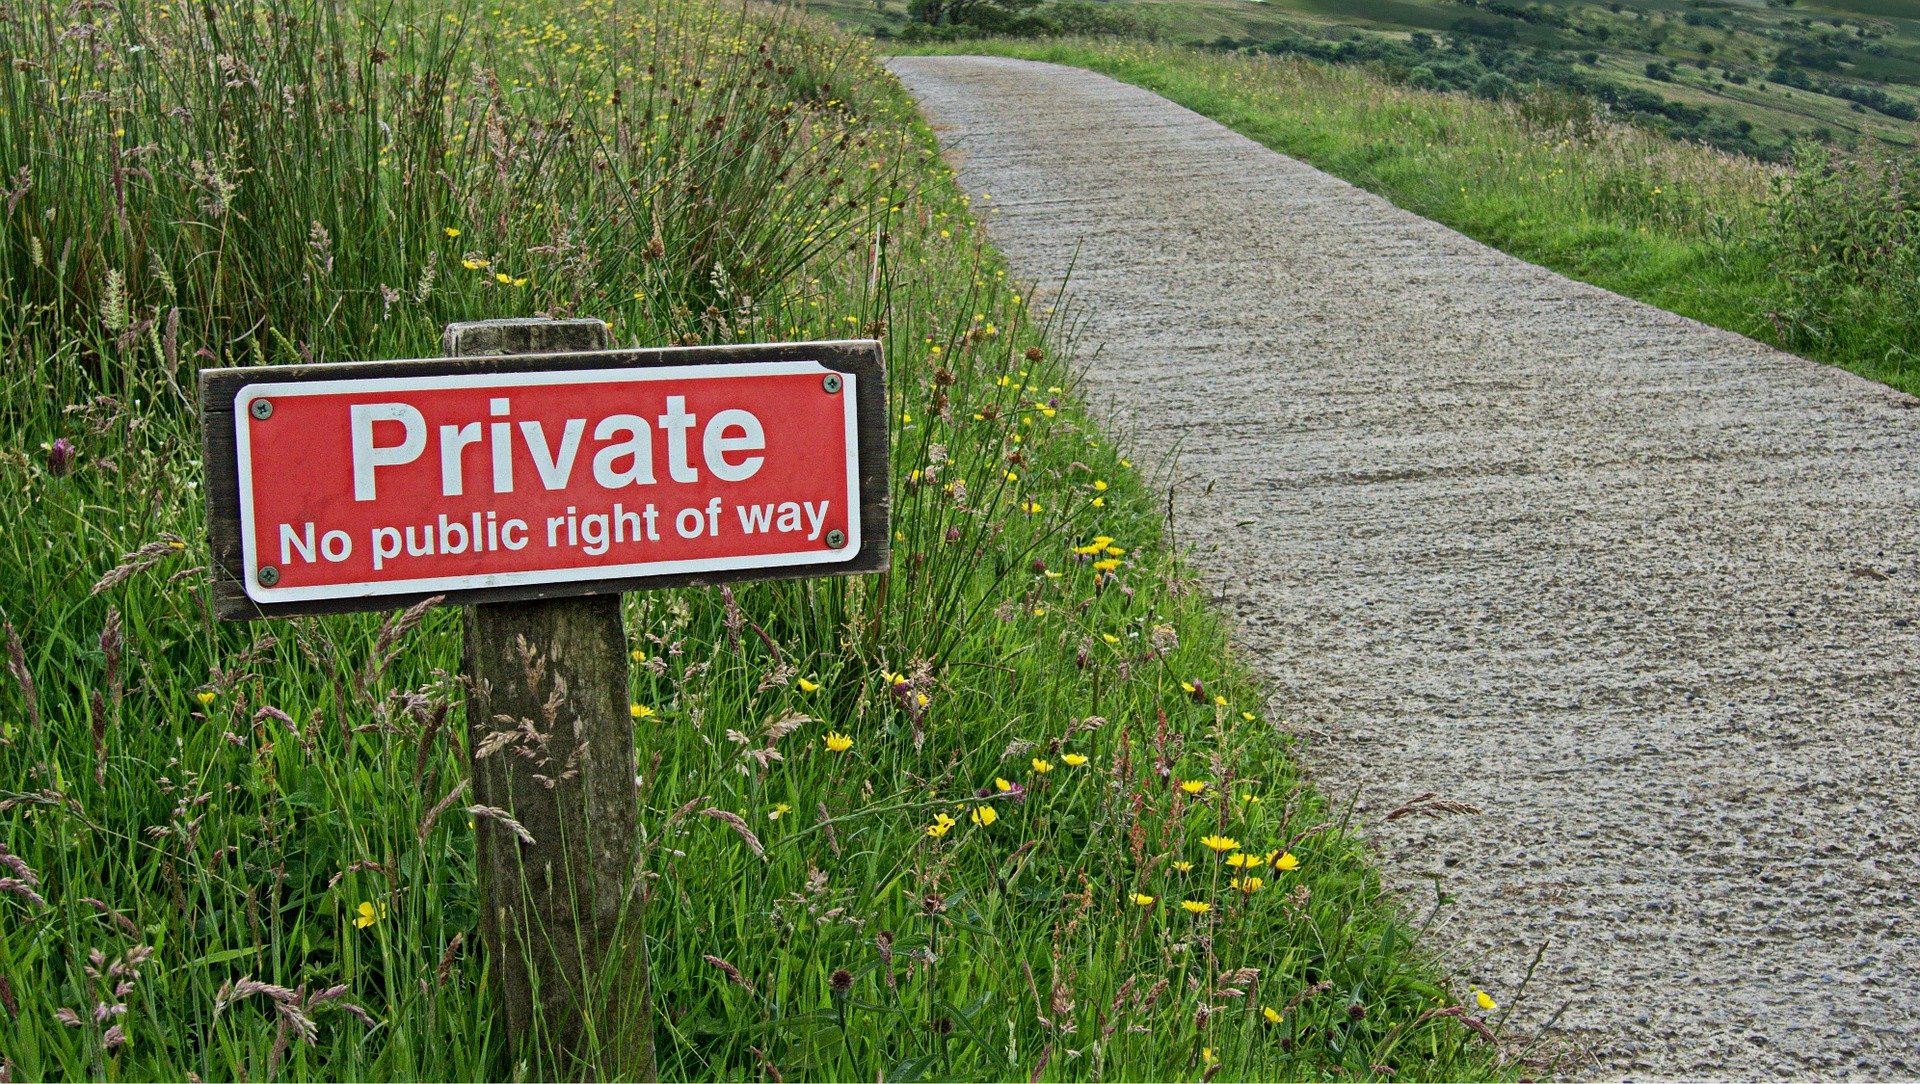 A privacy warning sign. | Source: Pixabay.